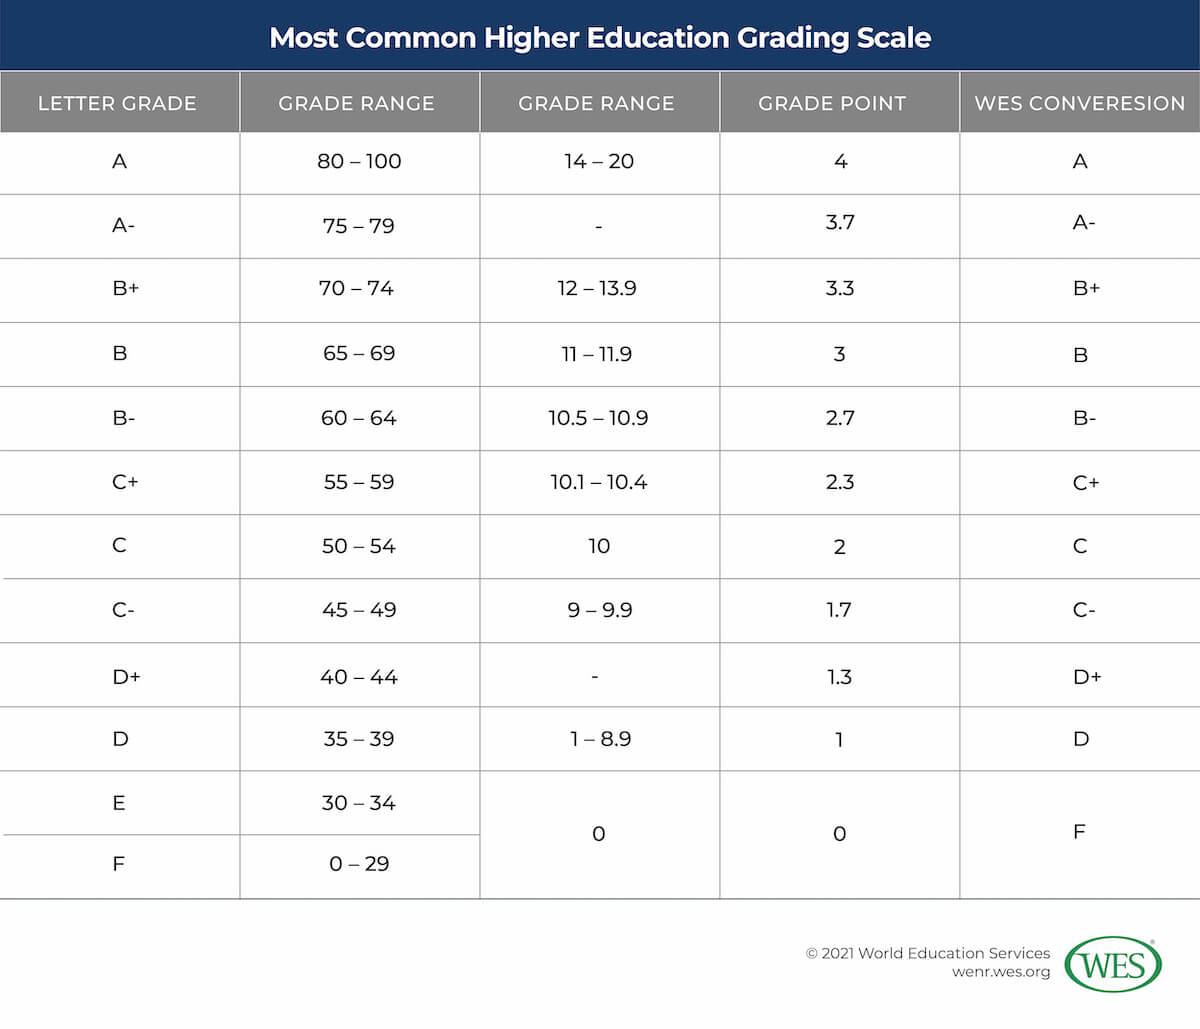 Education in Cameroon Image 13: Table showing the most common higher education grading scale in Cameroon